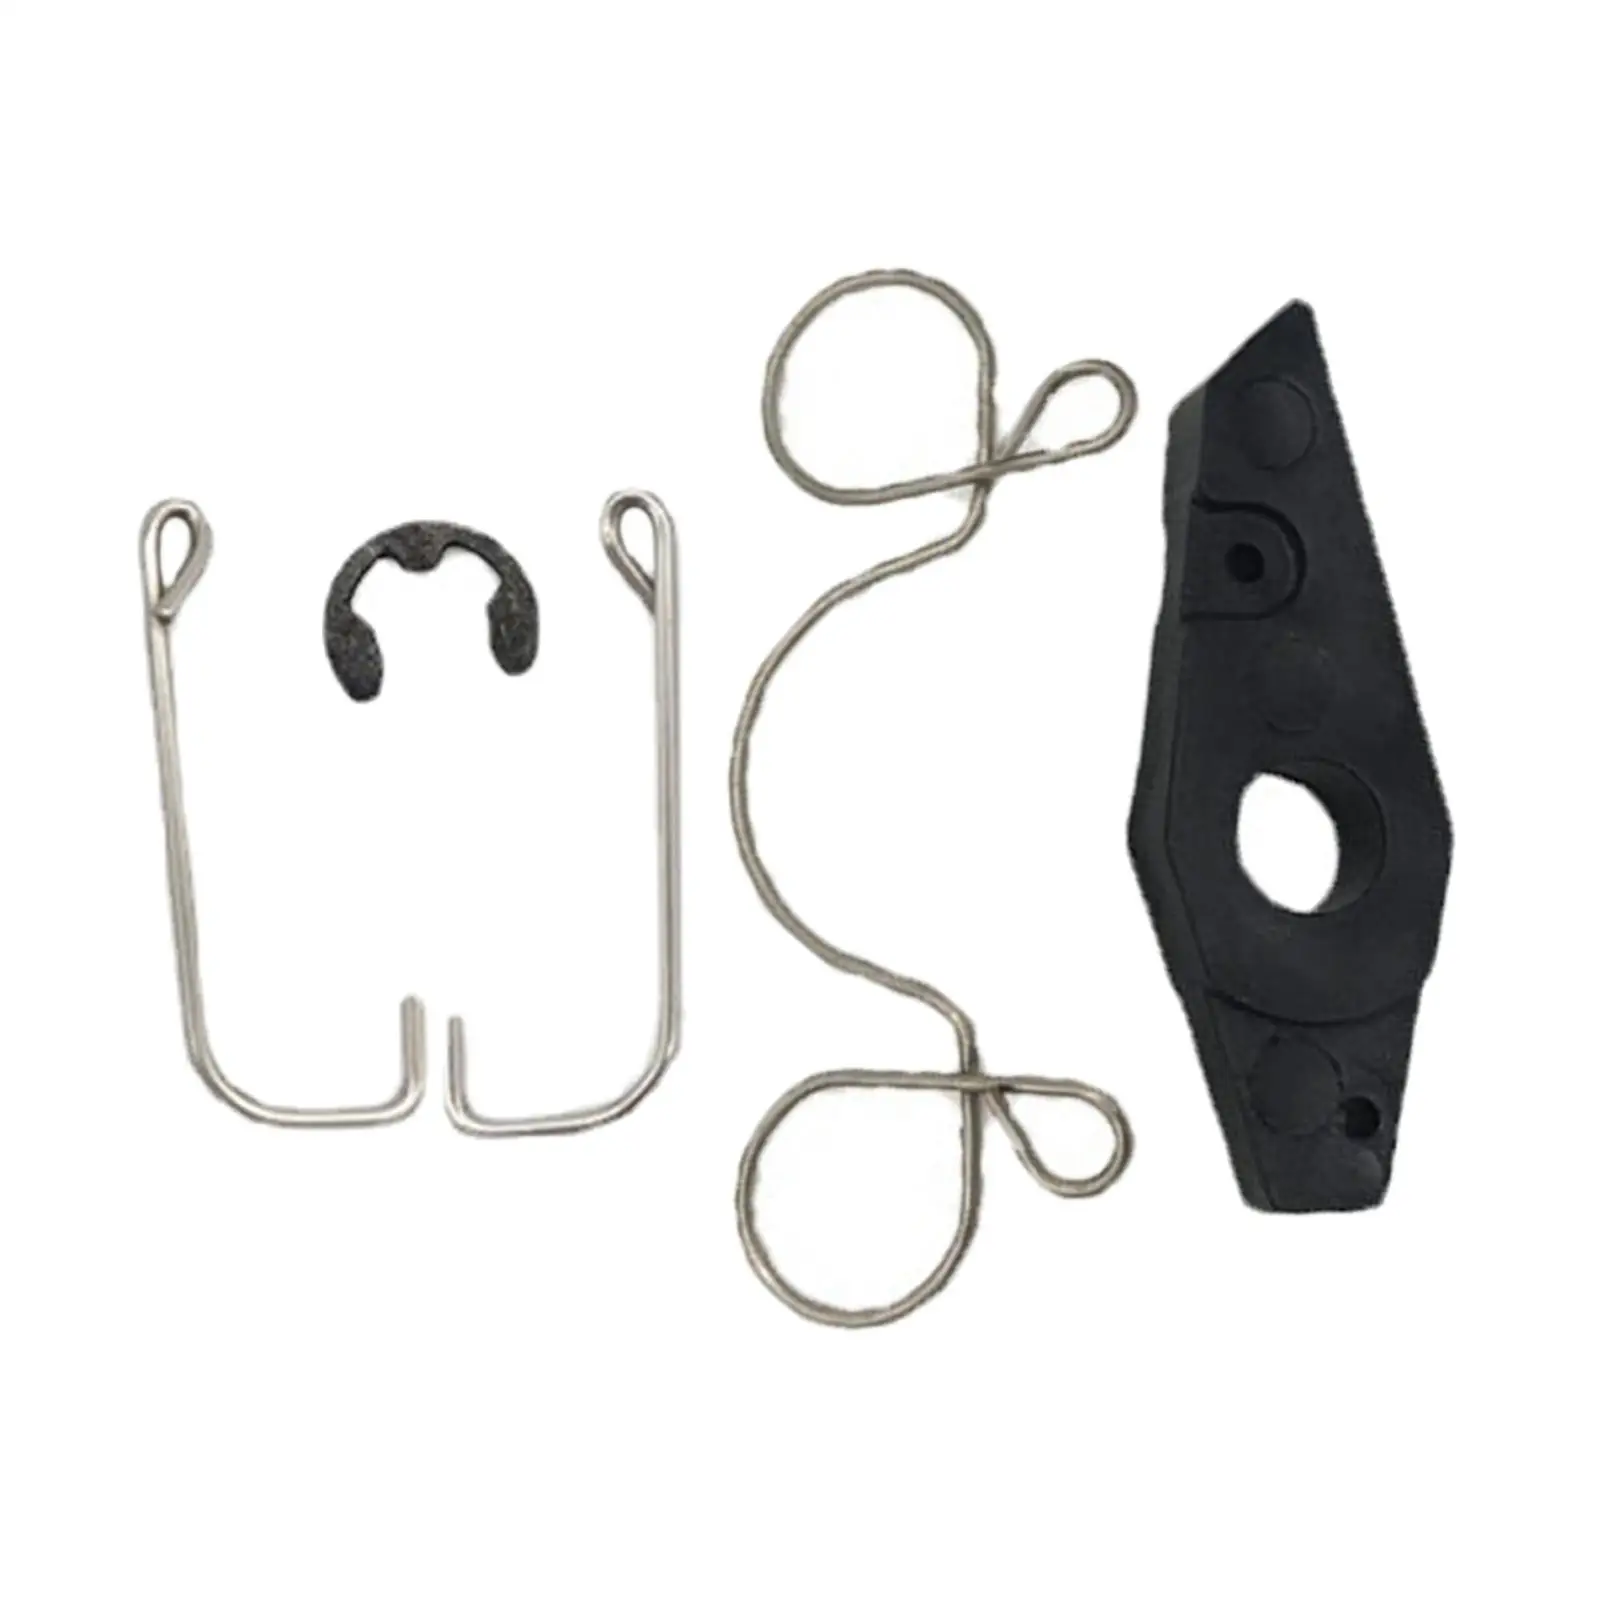 Pull Start Repair Tools Easy to Install Accessory Replacement Starter Parts for Outboard 2-  